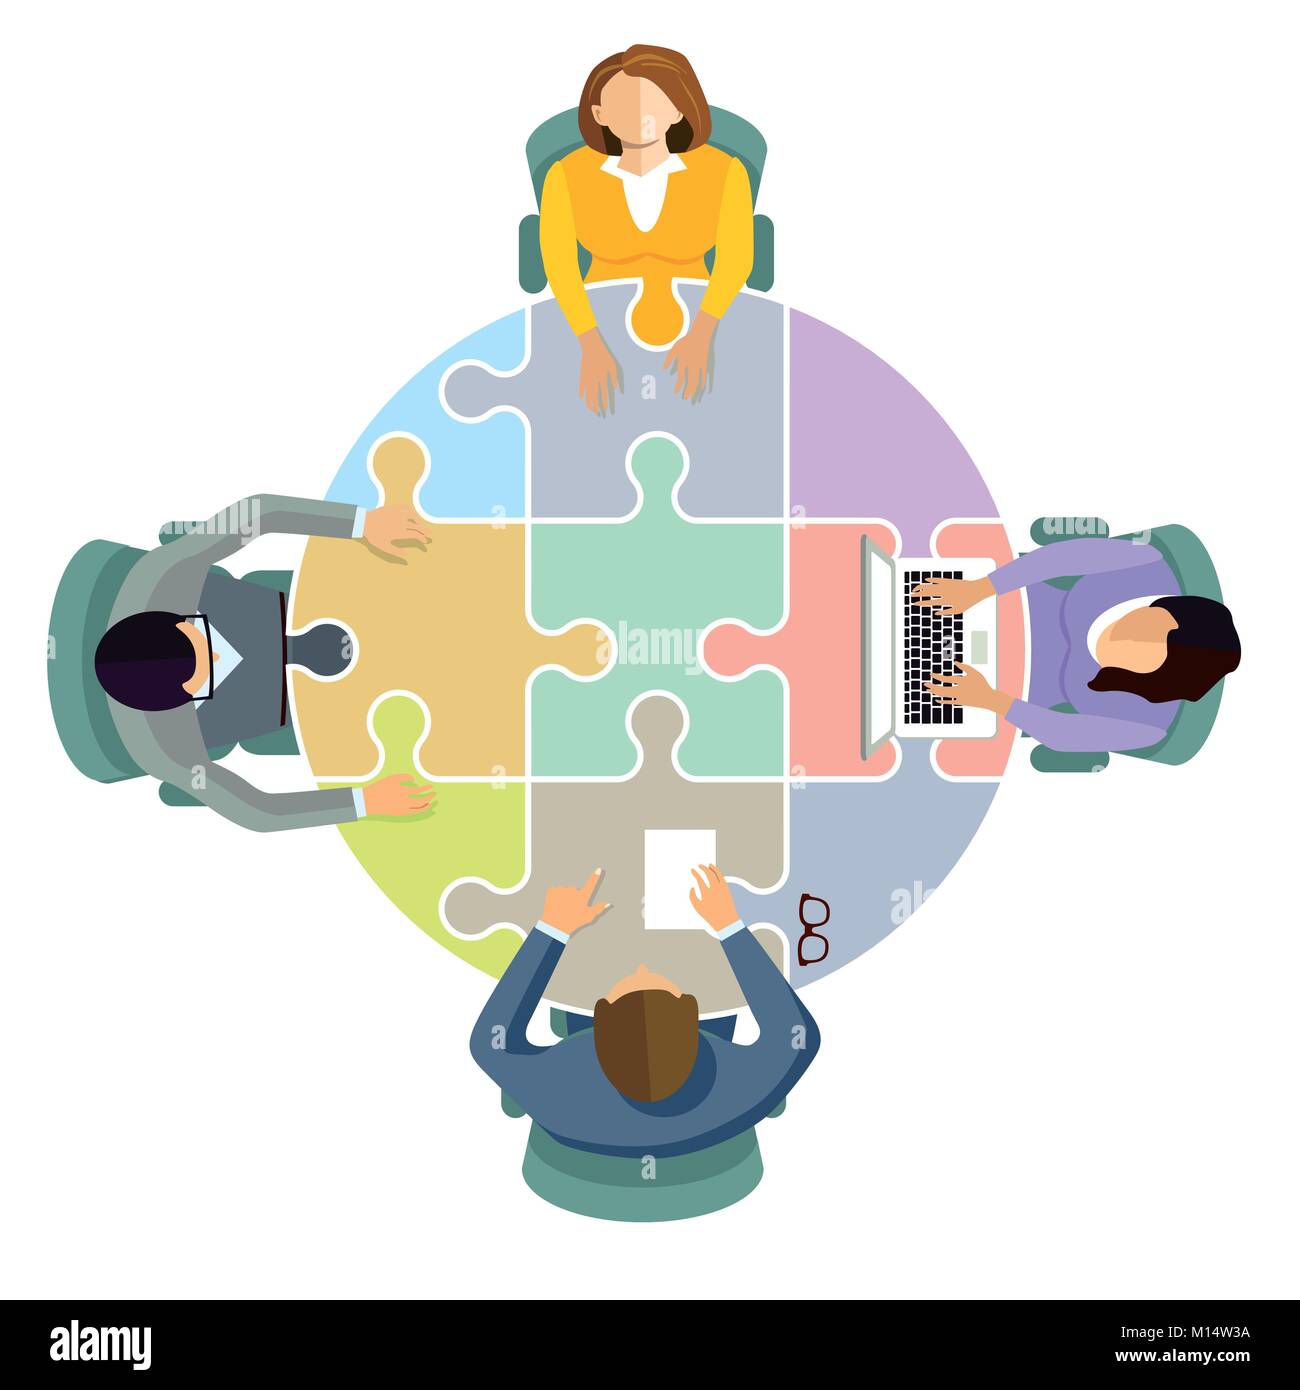 Team collaboration and connect, illustration Stock Vector